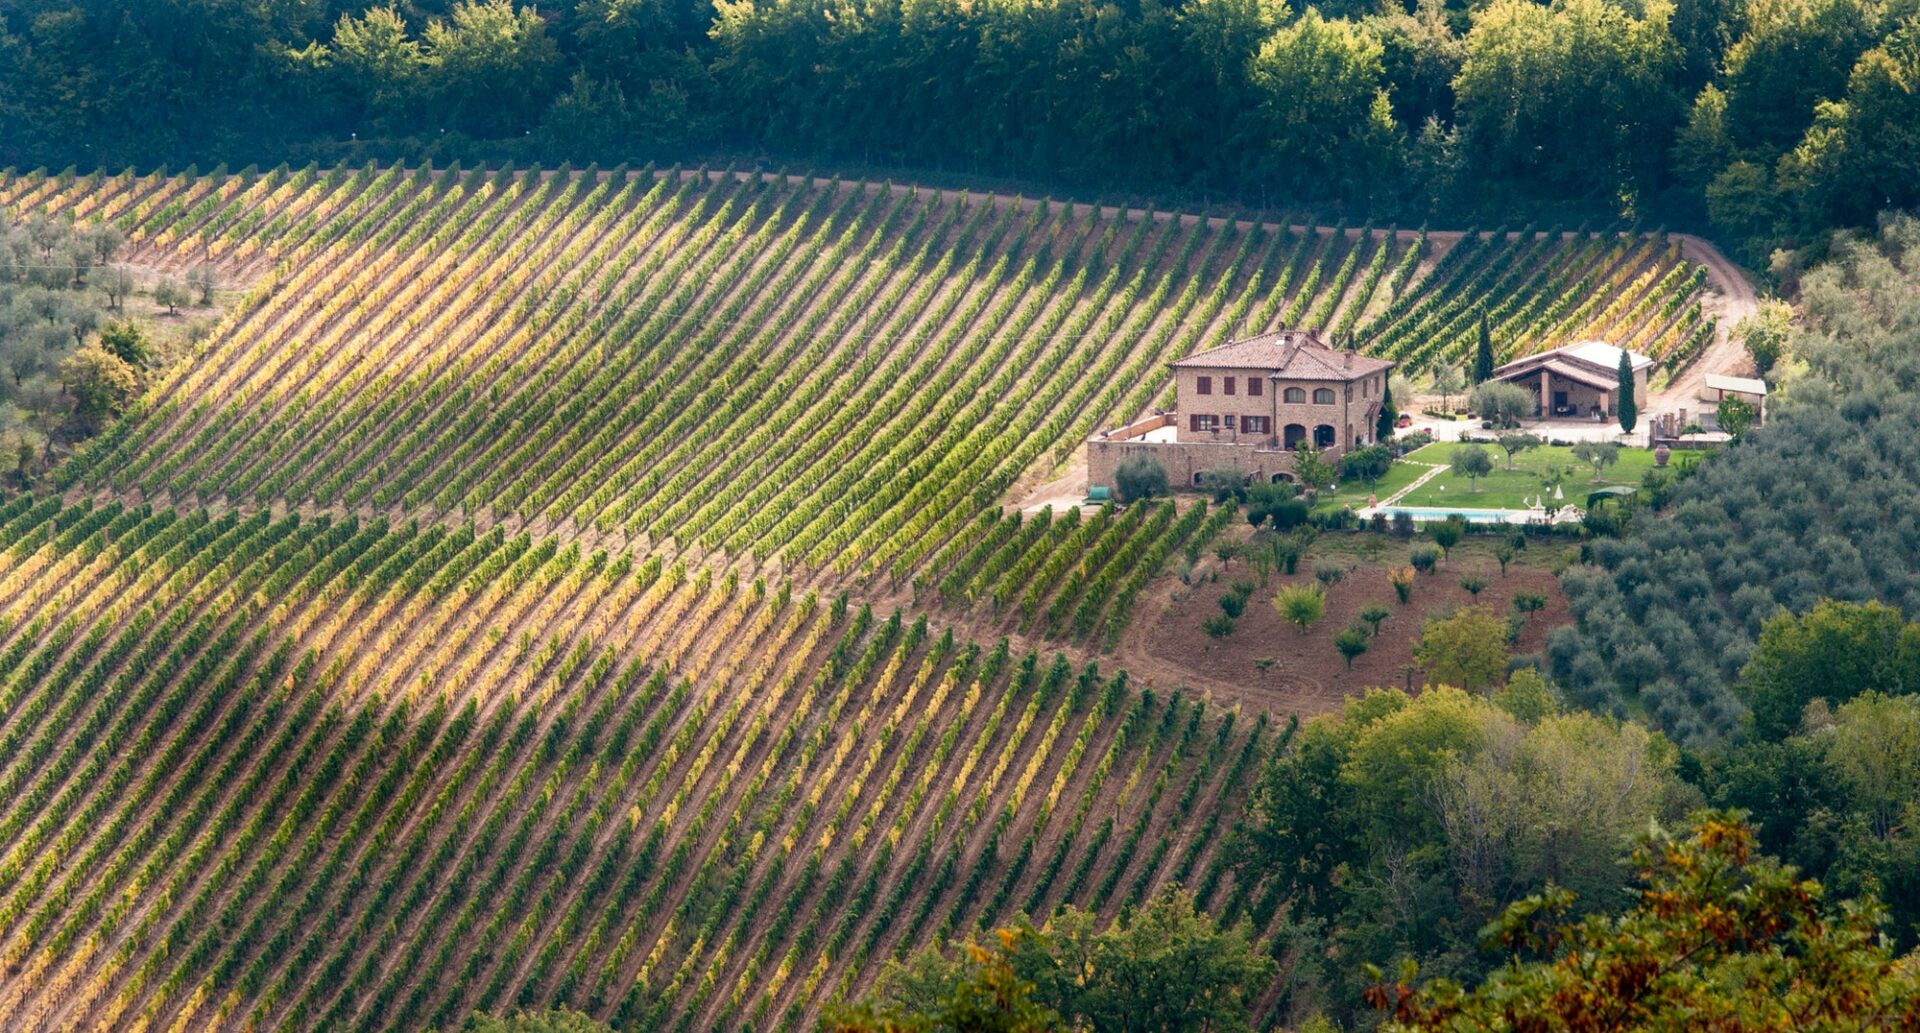 Rows of pruned bare grape vines in early autumn with cottage house. Tuscany Italy